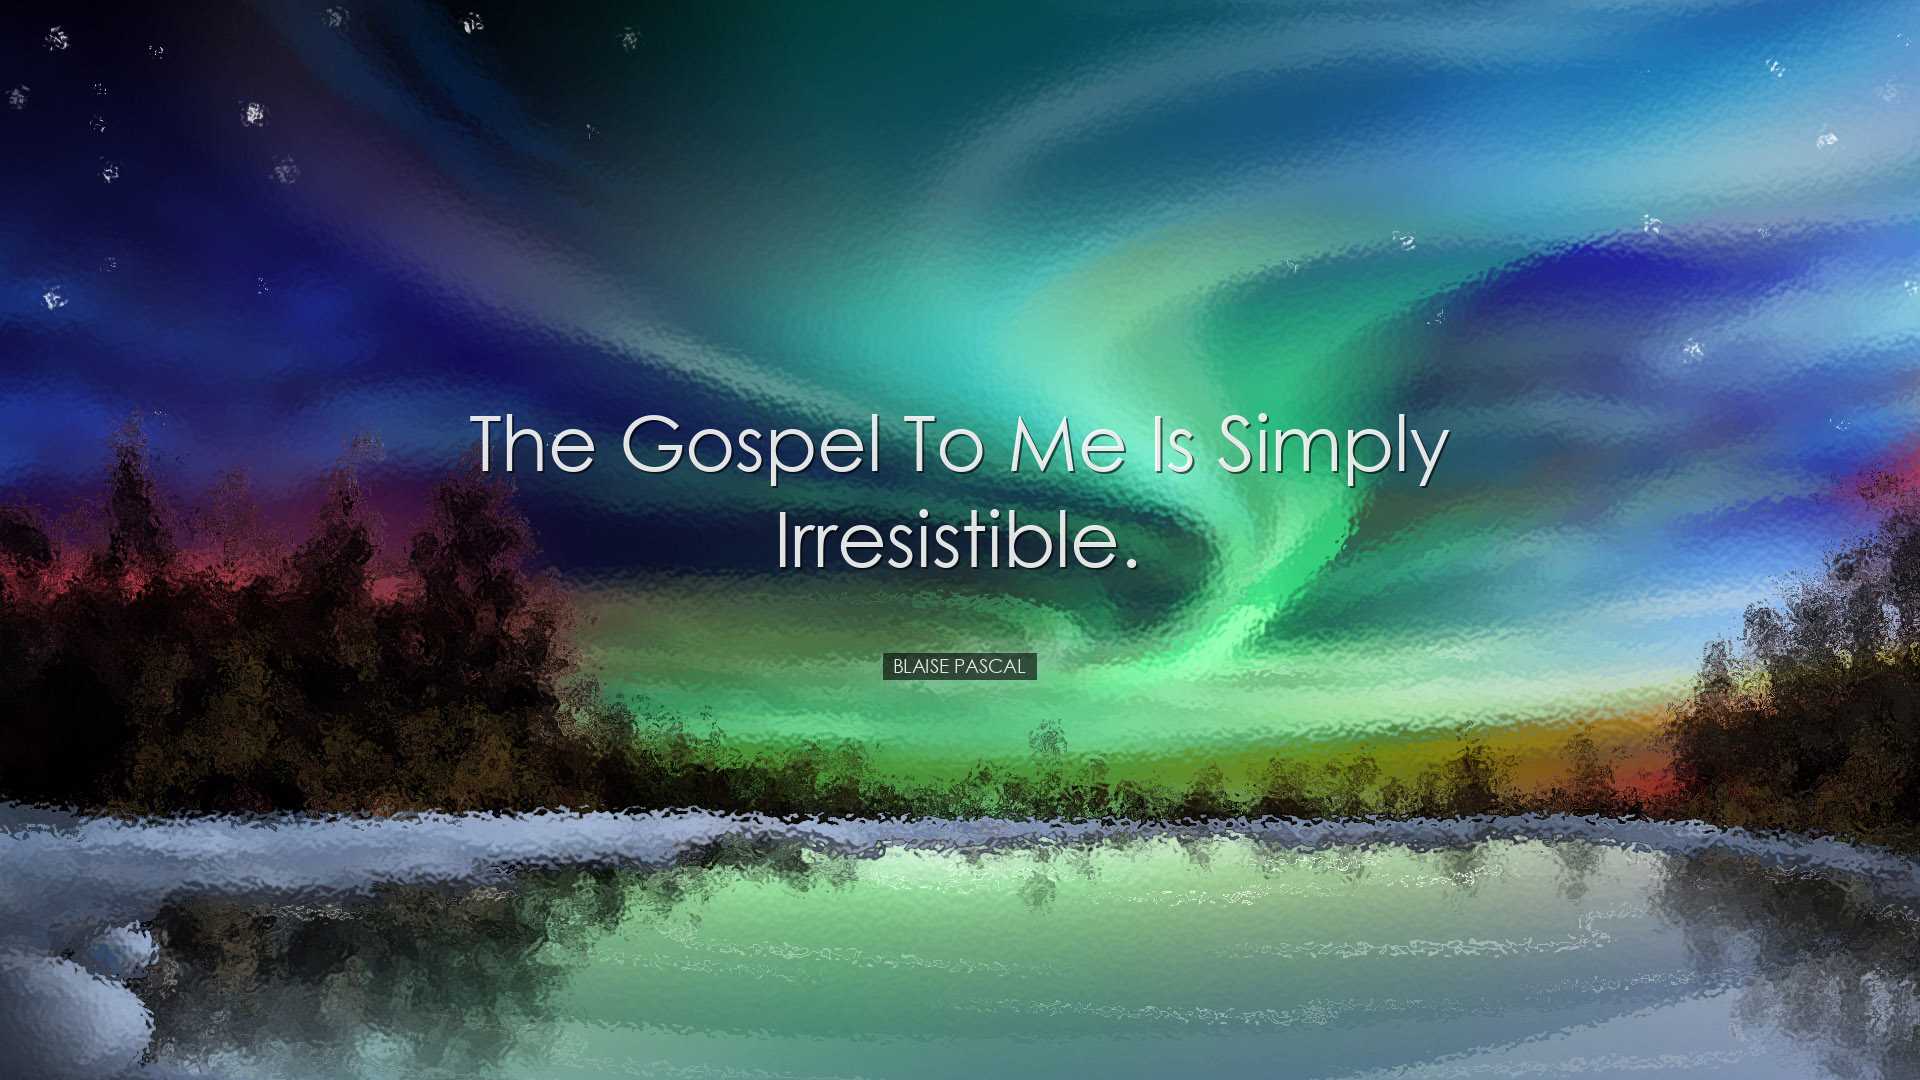 The gospel to me is simply irresistible. - Blaise Pascal